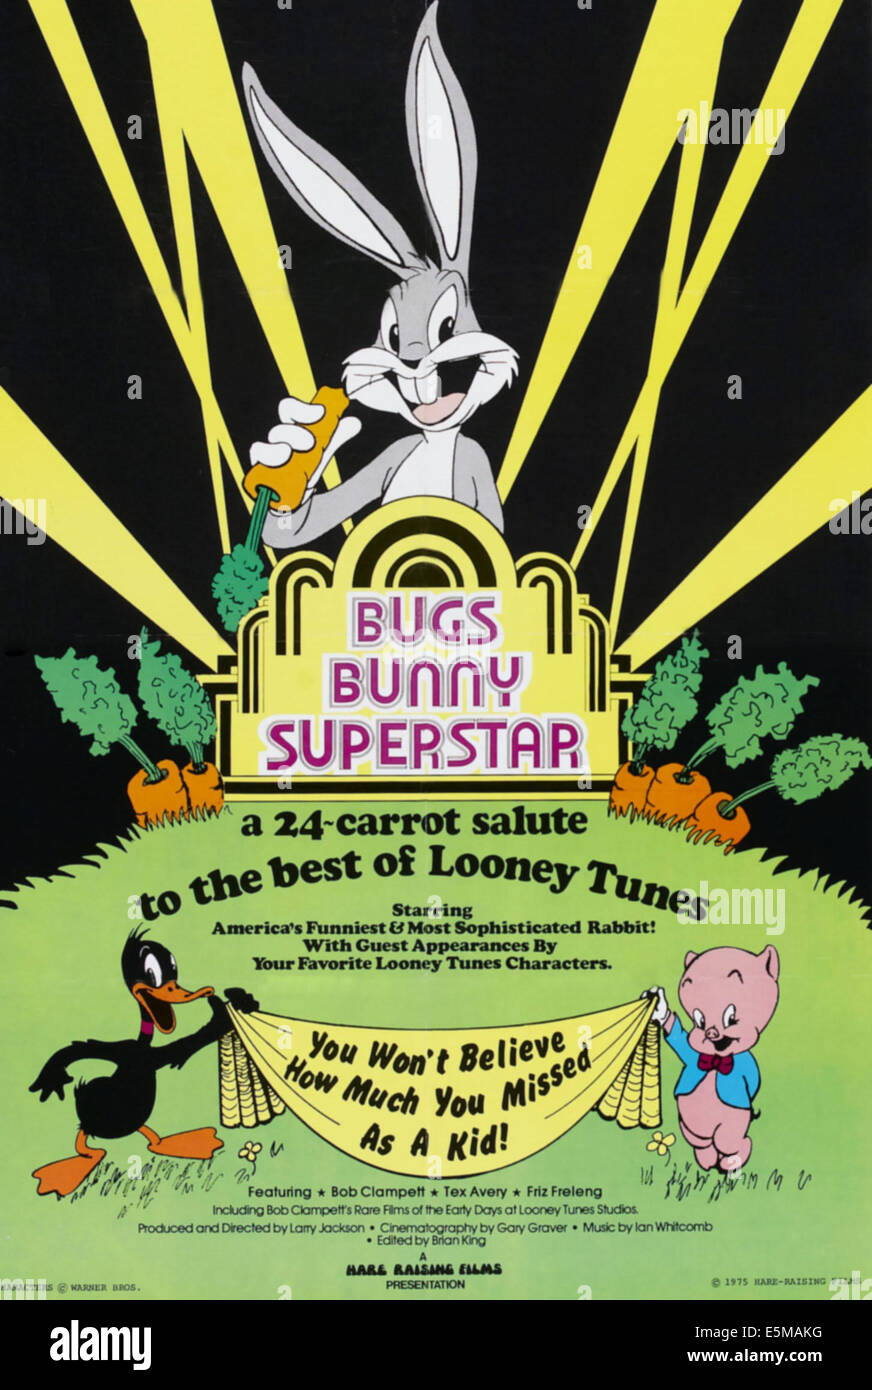 BUGS BUNNY SUPERSTAR, top: Bugs Bunny, bottom l-r: Daffy Duck, Porky Pig on poster art, 1975. Stock Photo